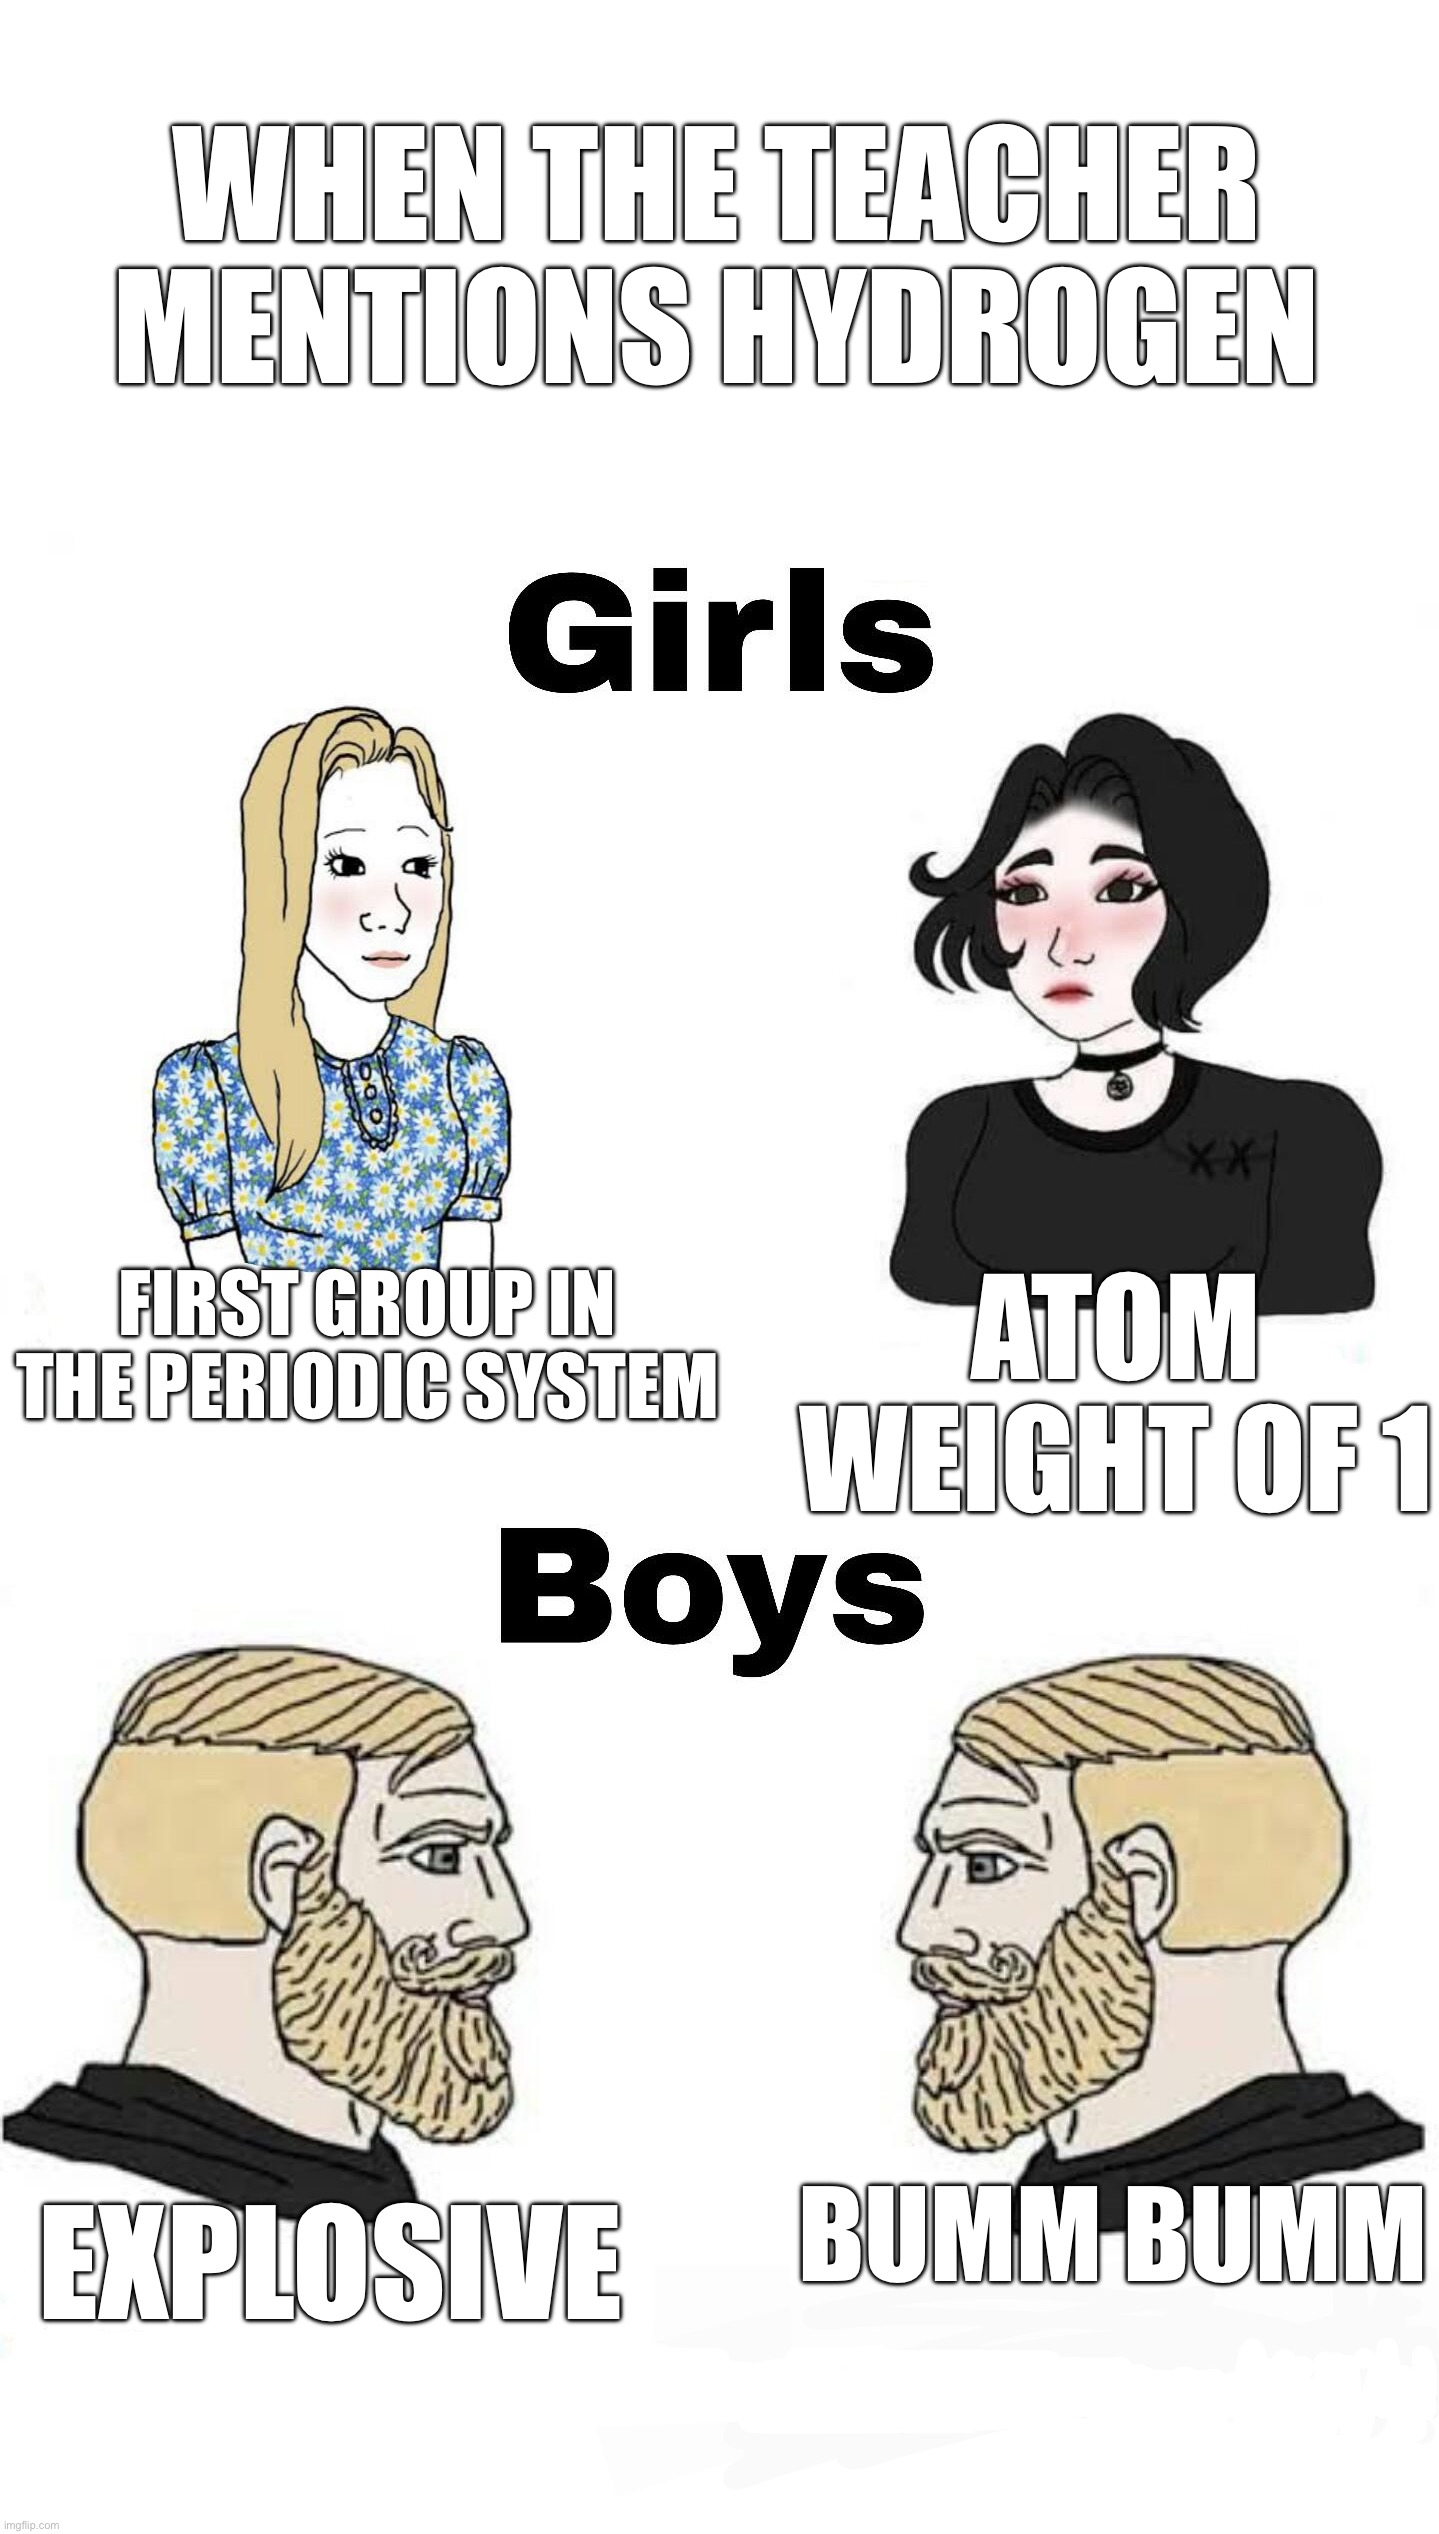 Hydrogen is great | WHEN THE TEACHER MENTIONS HYDROGEN; FIRST GROUP IN THE PERIODIC SYSTEM; ATOM WEIGHT OF 1; BUMM BUMM; EXPLOSIVE | image tagged in girls vs boys | made w/ Imgflip meme maker